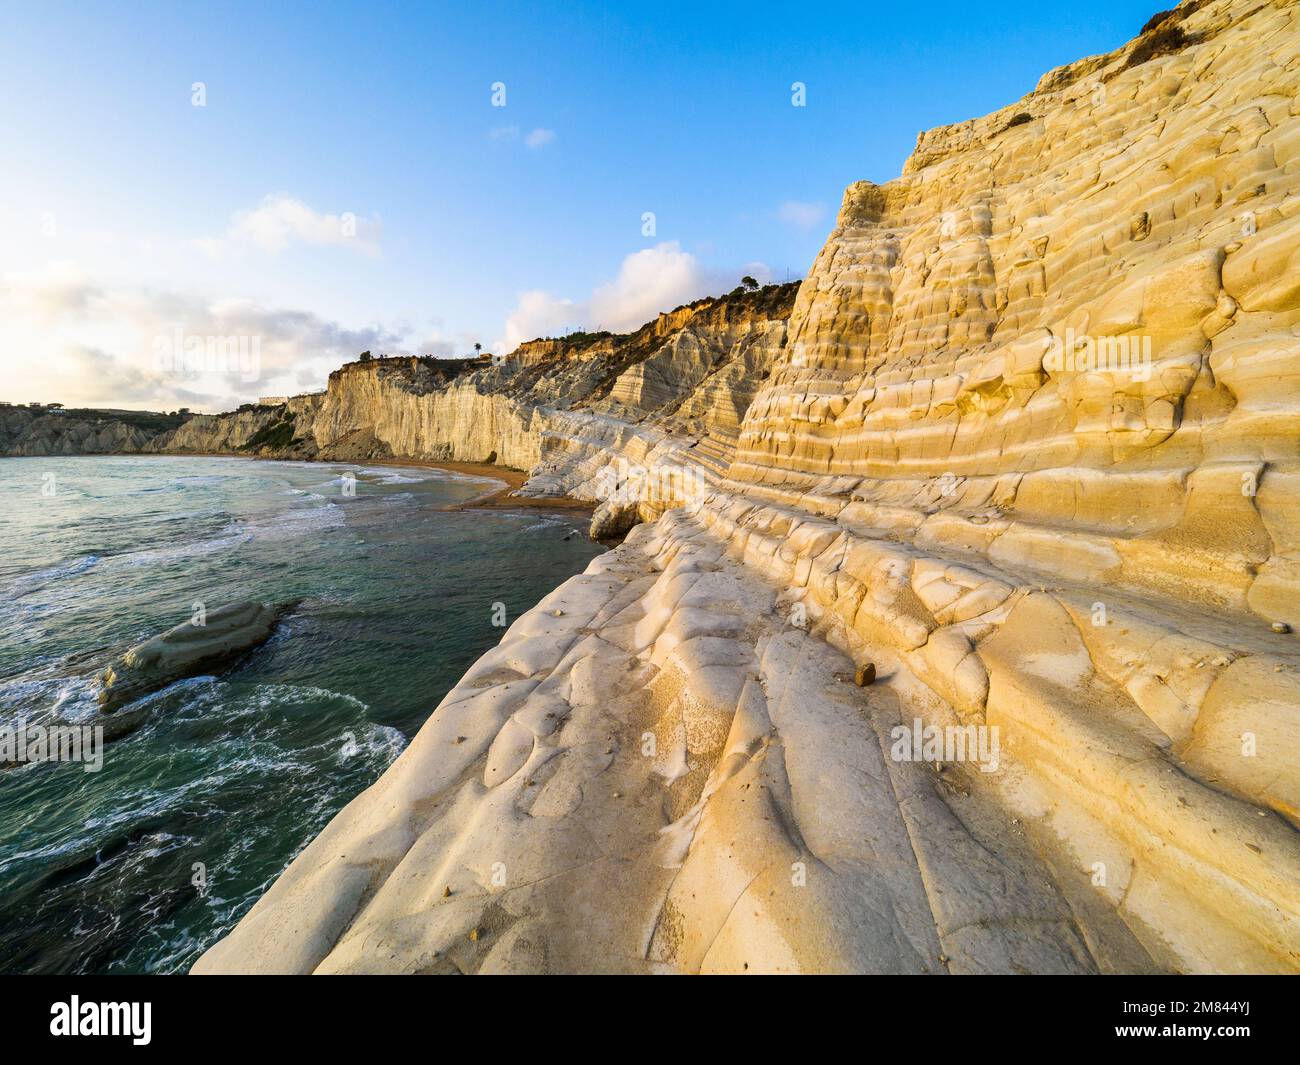 The Scala dei Turchi (Stair of the Turks) is a rocky cliff on the coast of Realmonte formed by marl, a sedimentary rock with a characteristic white color, formed from the tests of planktonic foraminifera. Agrigento, Sicily , Italy Stock Photo